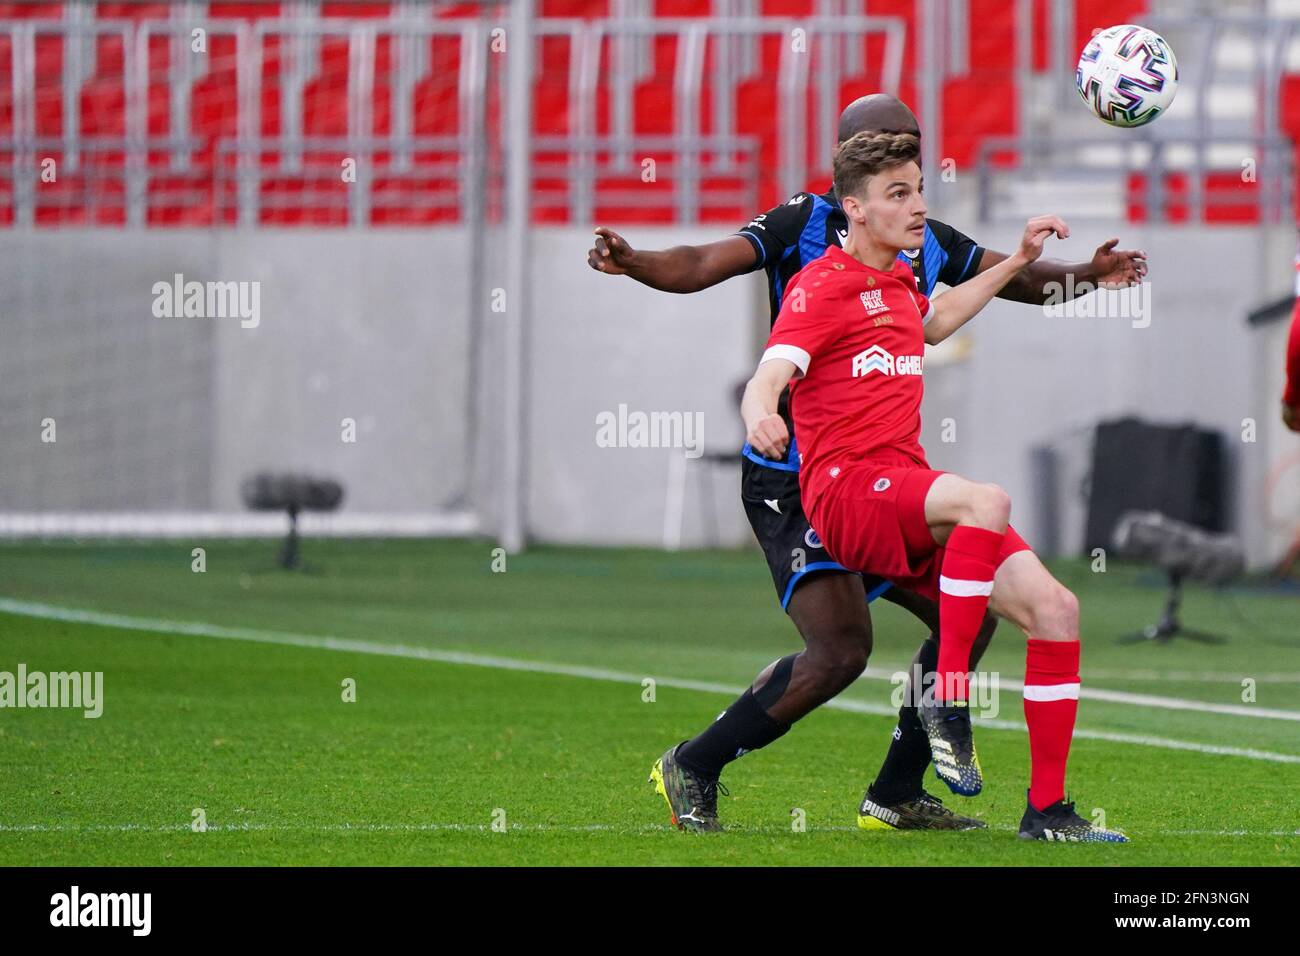 ANTWERP, BELGIUM - MAY 13: Eder Balanta of Club Brugge battles for posession with Pieter Gerkens of Royal Antwerp during the Jupiler Pro League match Stock Photo